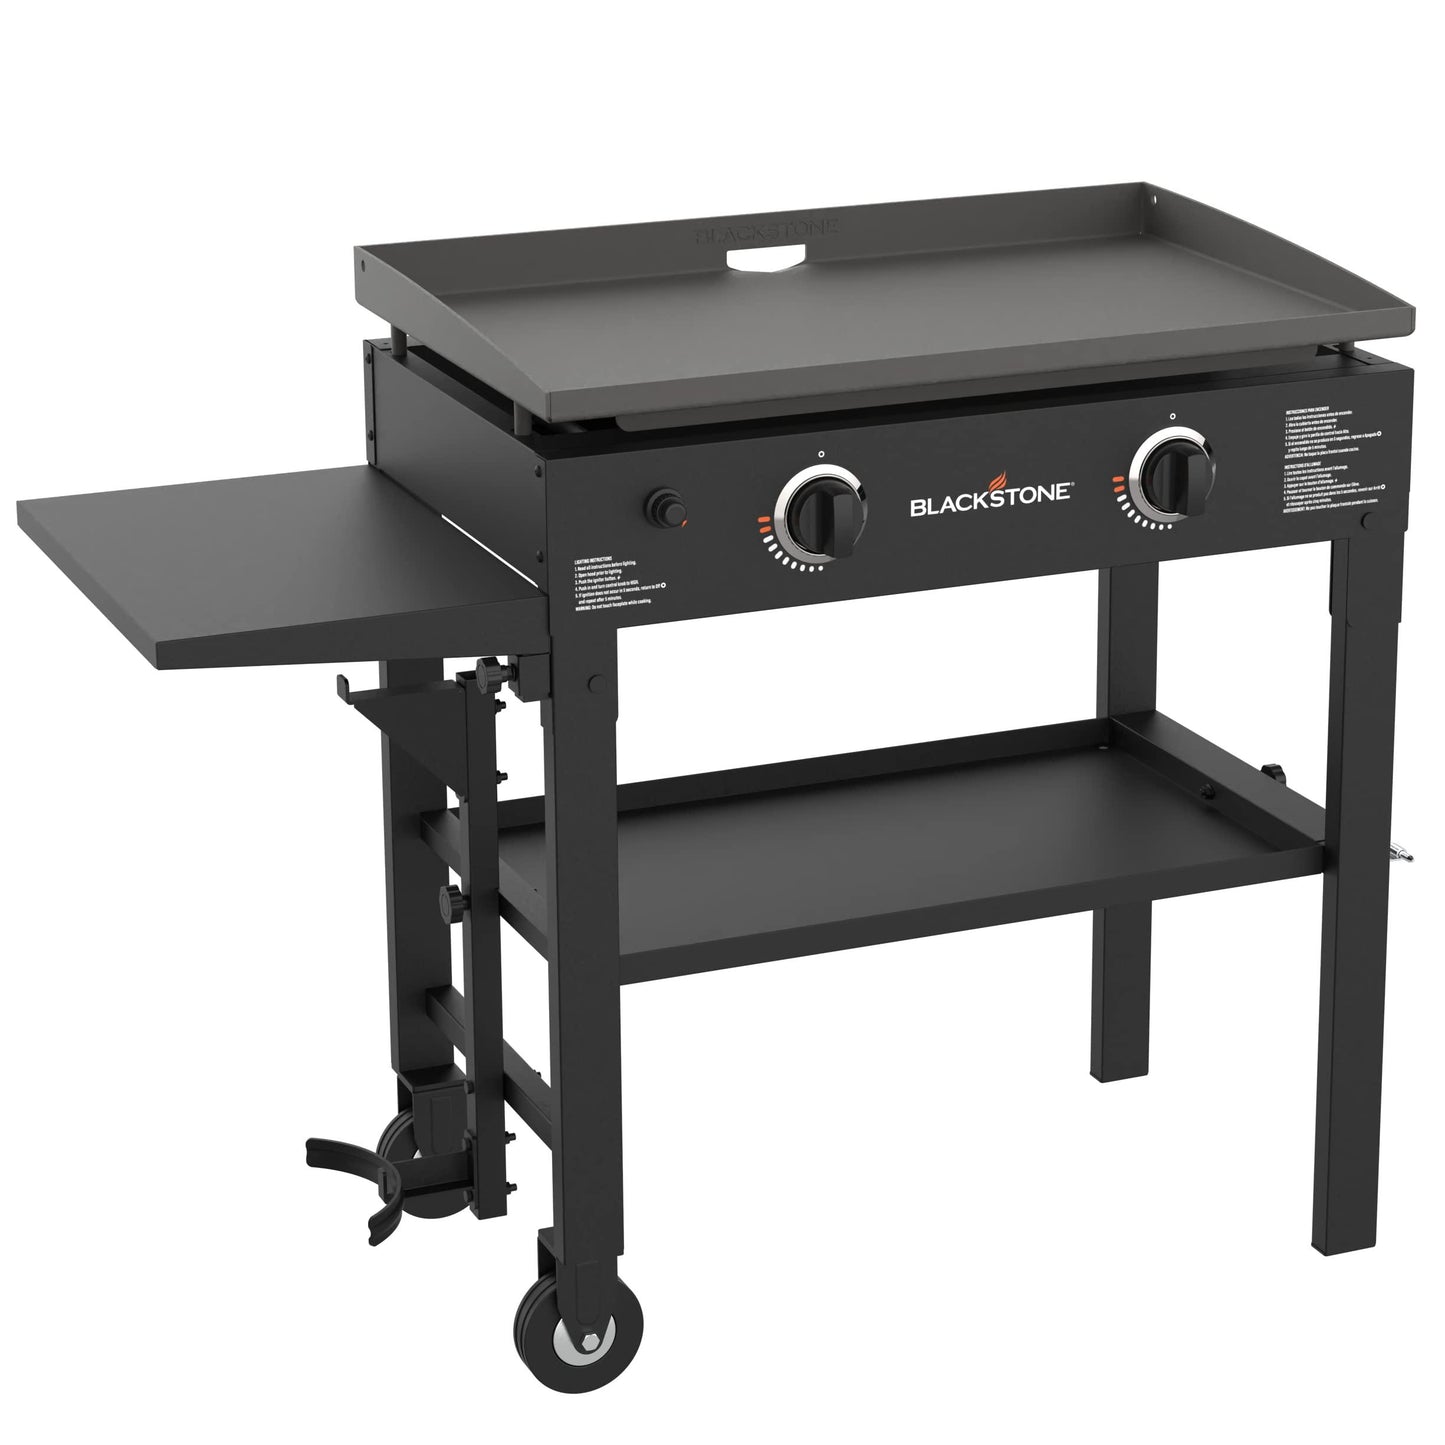 Blackstone Flat Top Gas Grill Griddle 2 Burner Propane Fuelled Rear Grease Management System, 1517, Outdoor Griddle Station for Camping, 28 inch - CookCave